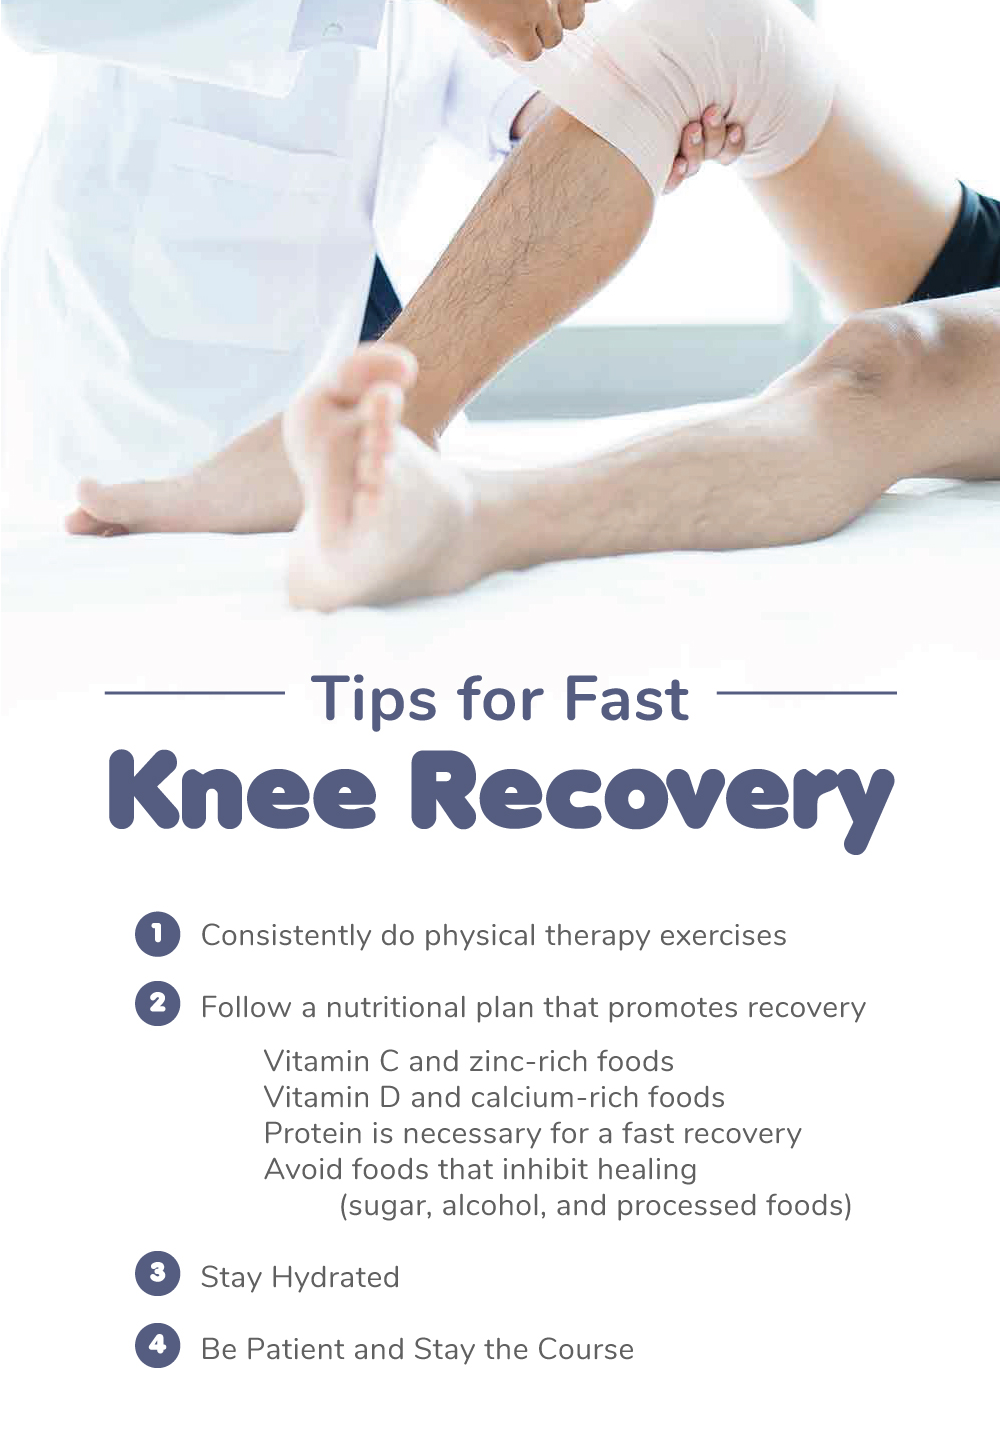 Tips for fast knee recovery